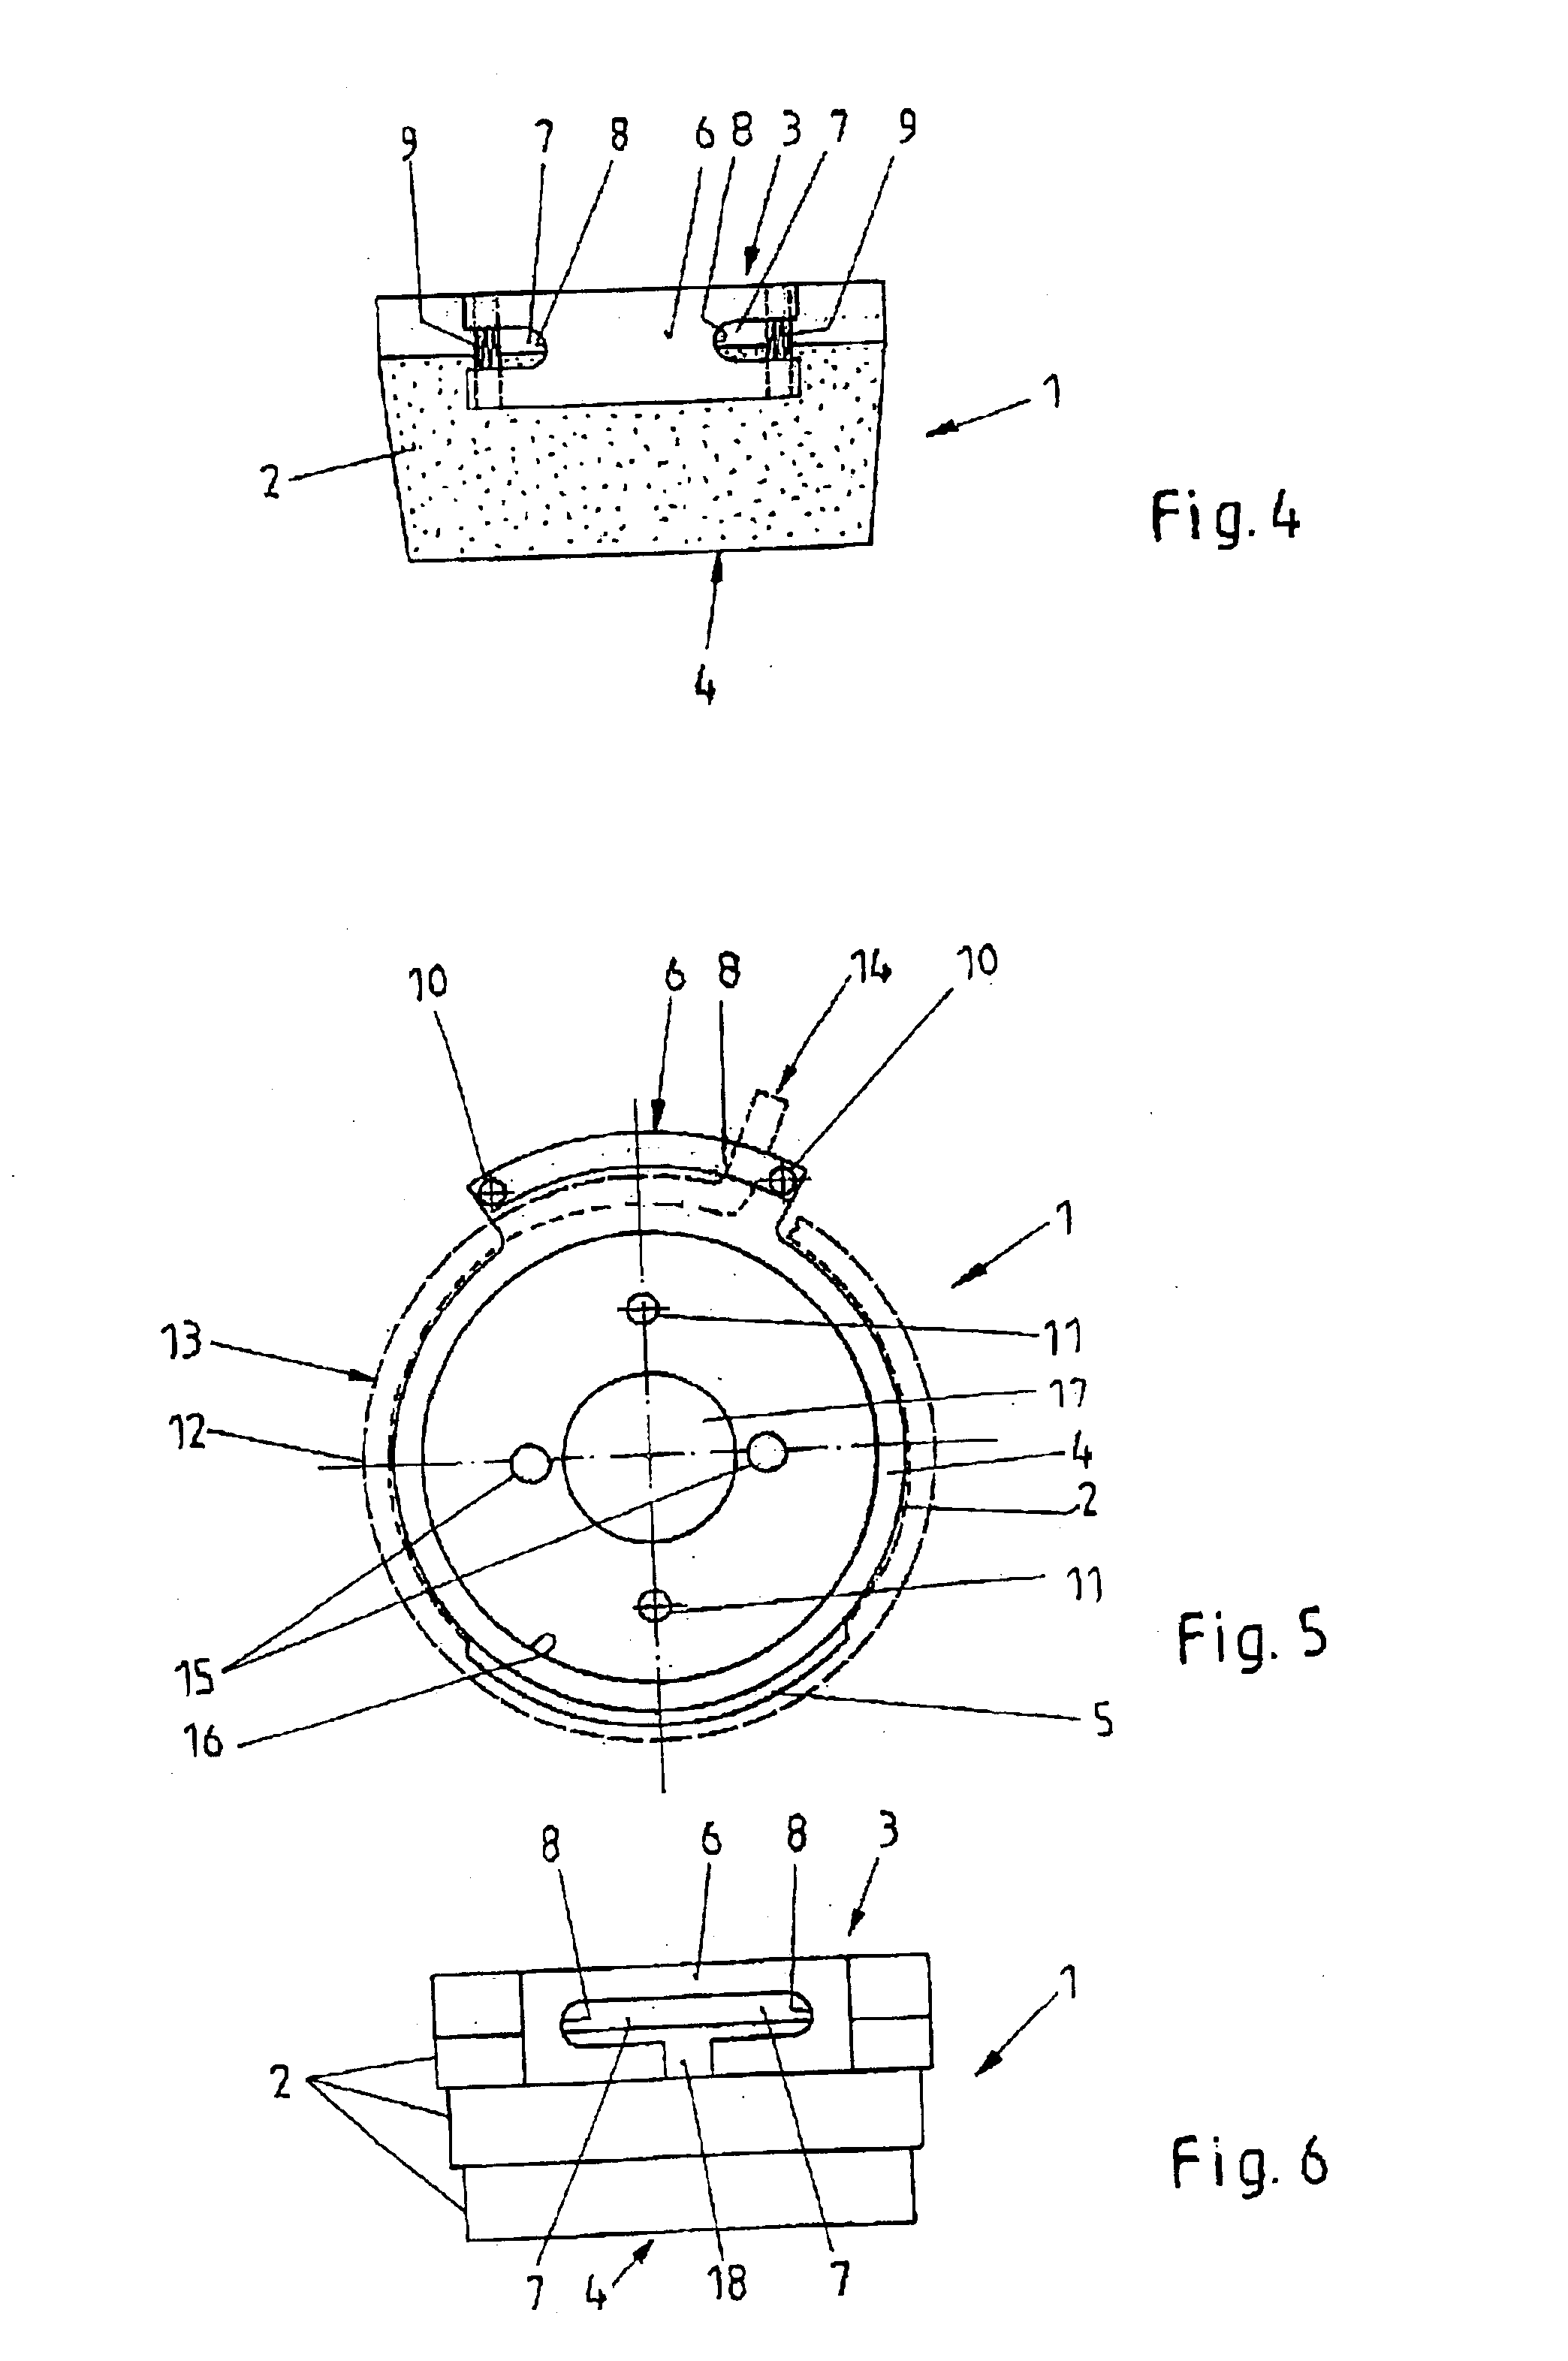 Spring holding cone for holding a spring end of a spiral torsion spring